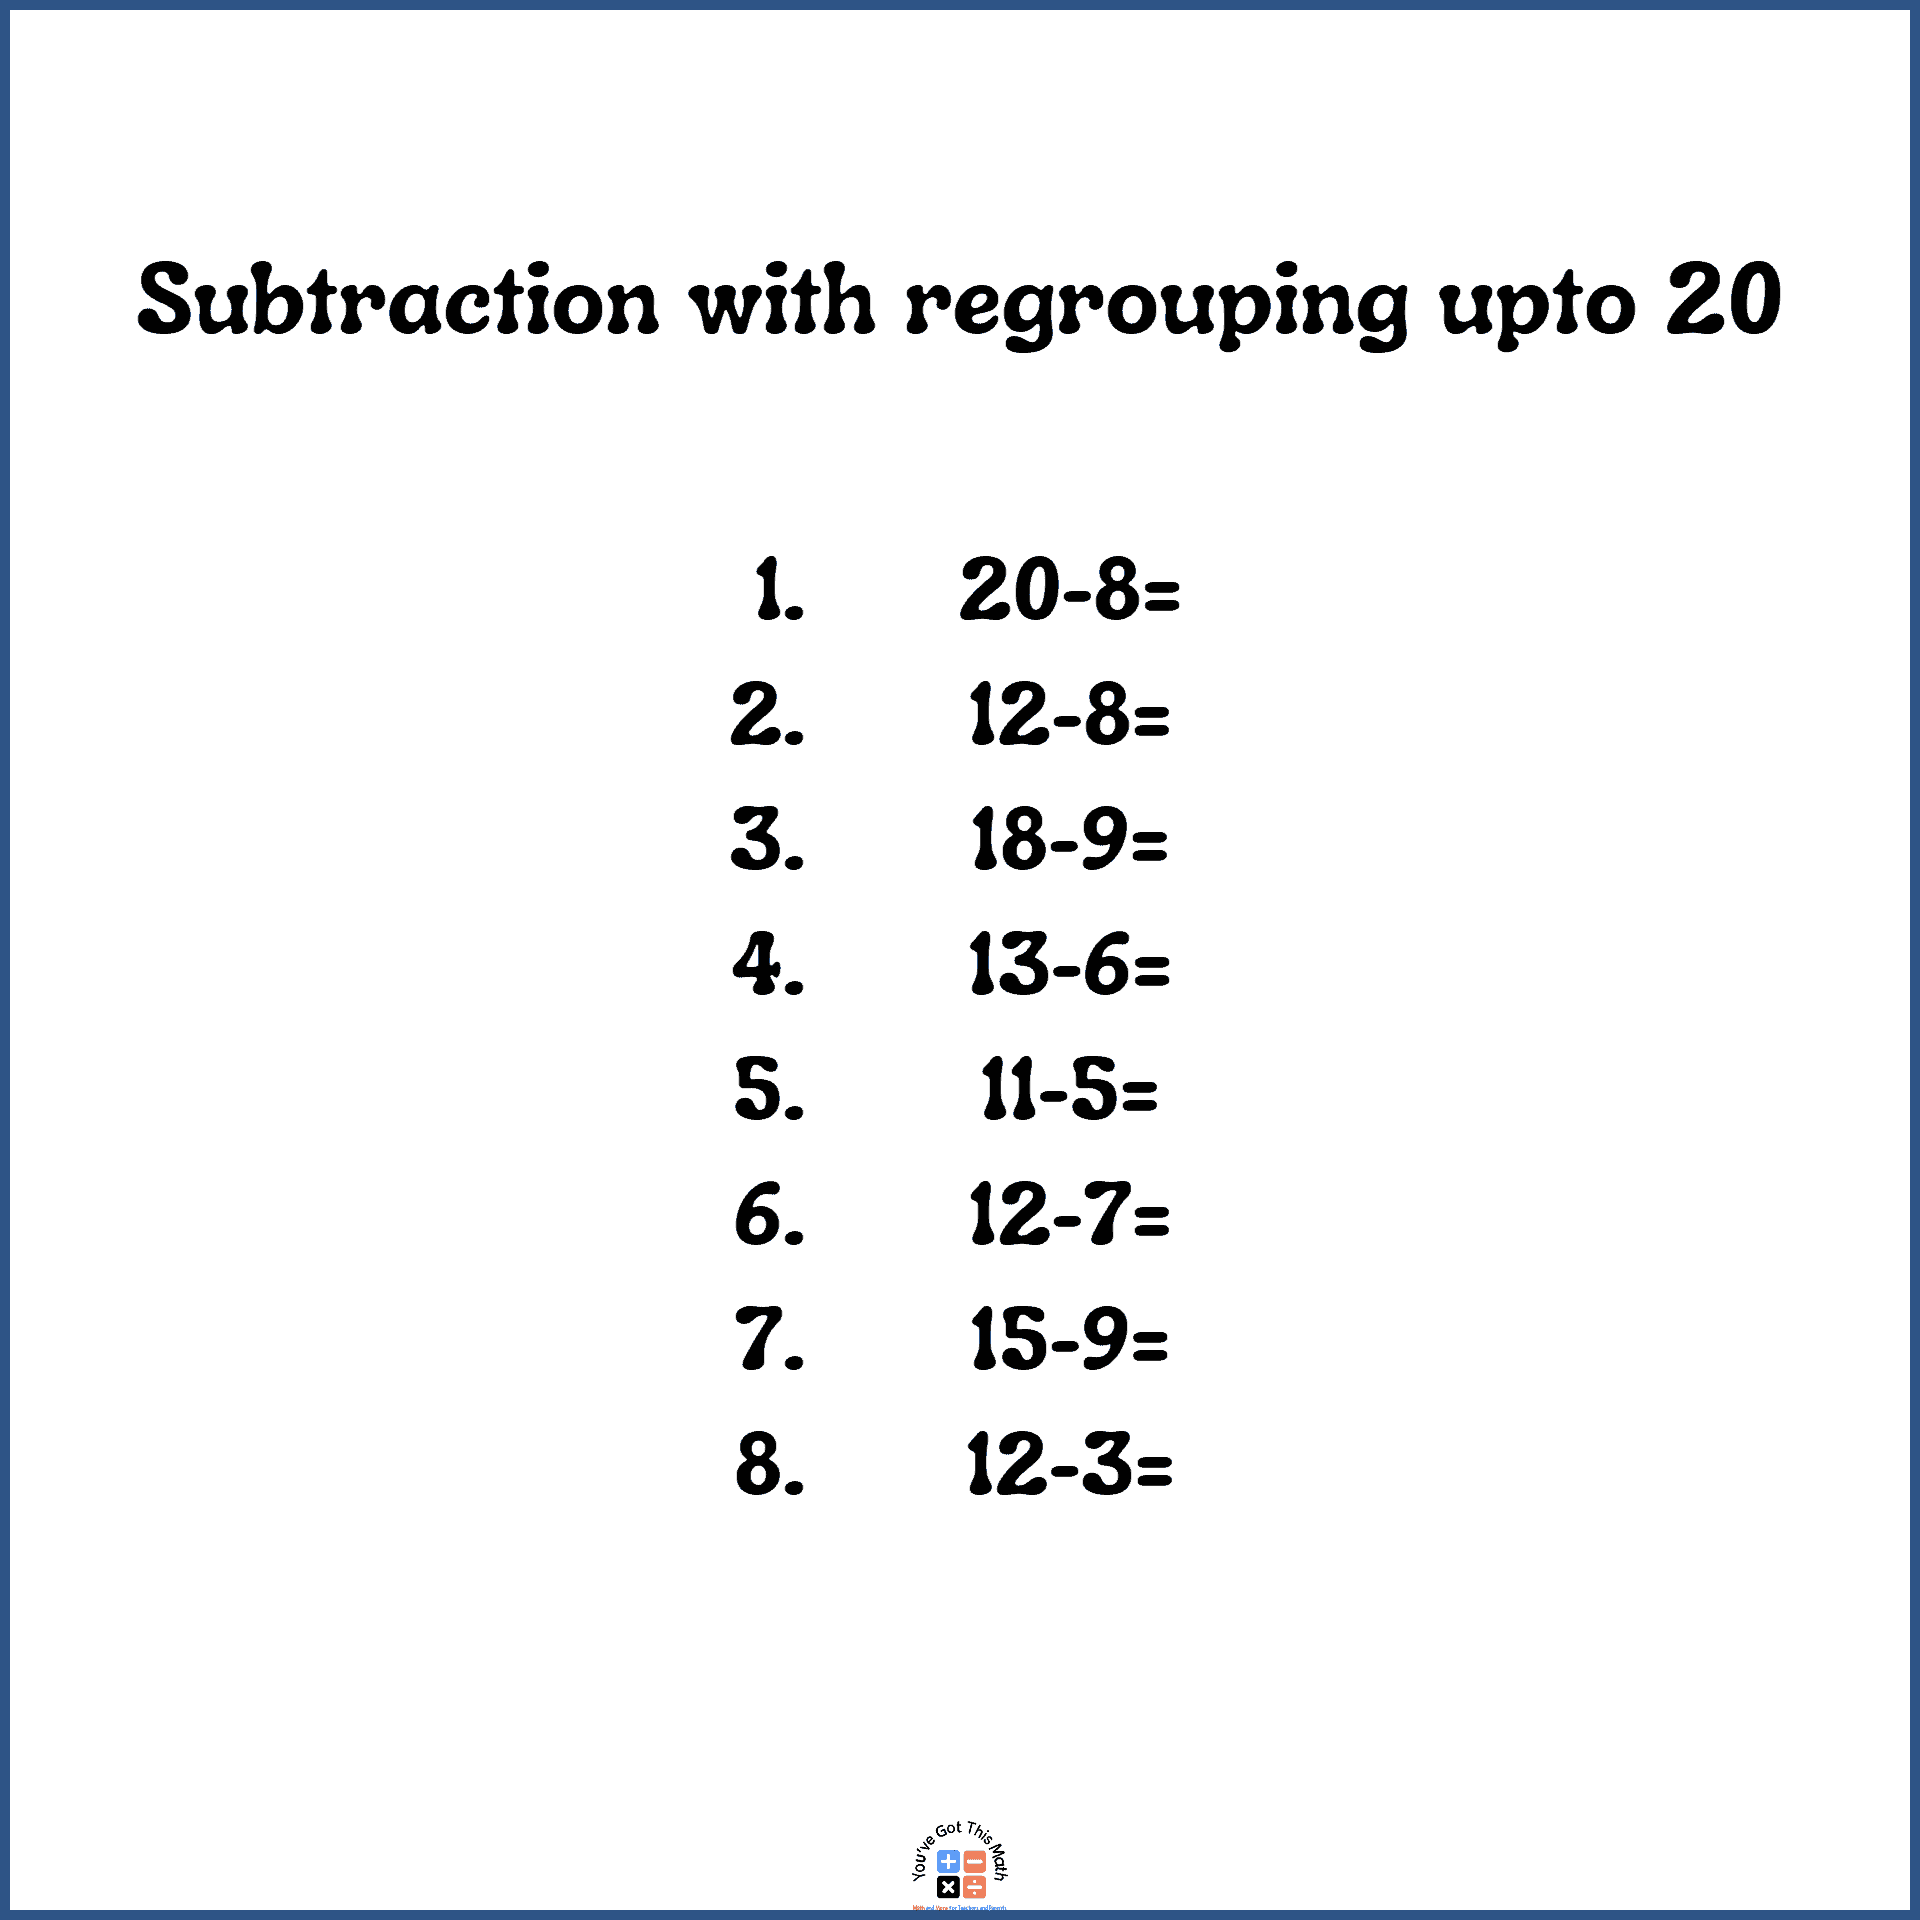 Subtraction upto 20 to subtract 2 digit numbers with regrouping.